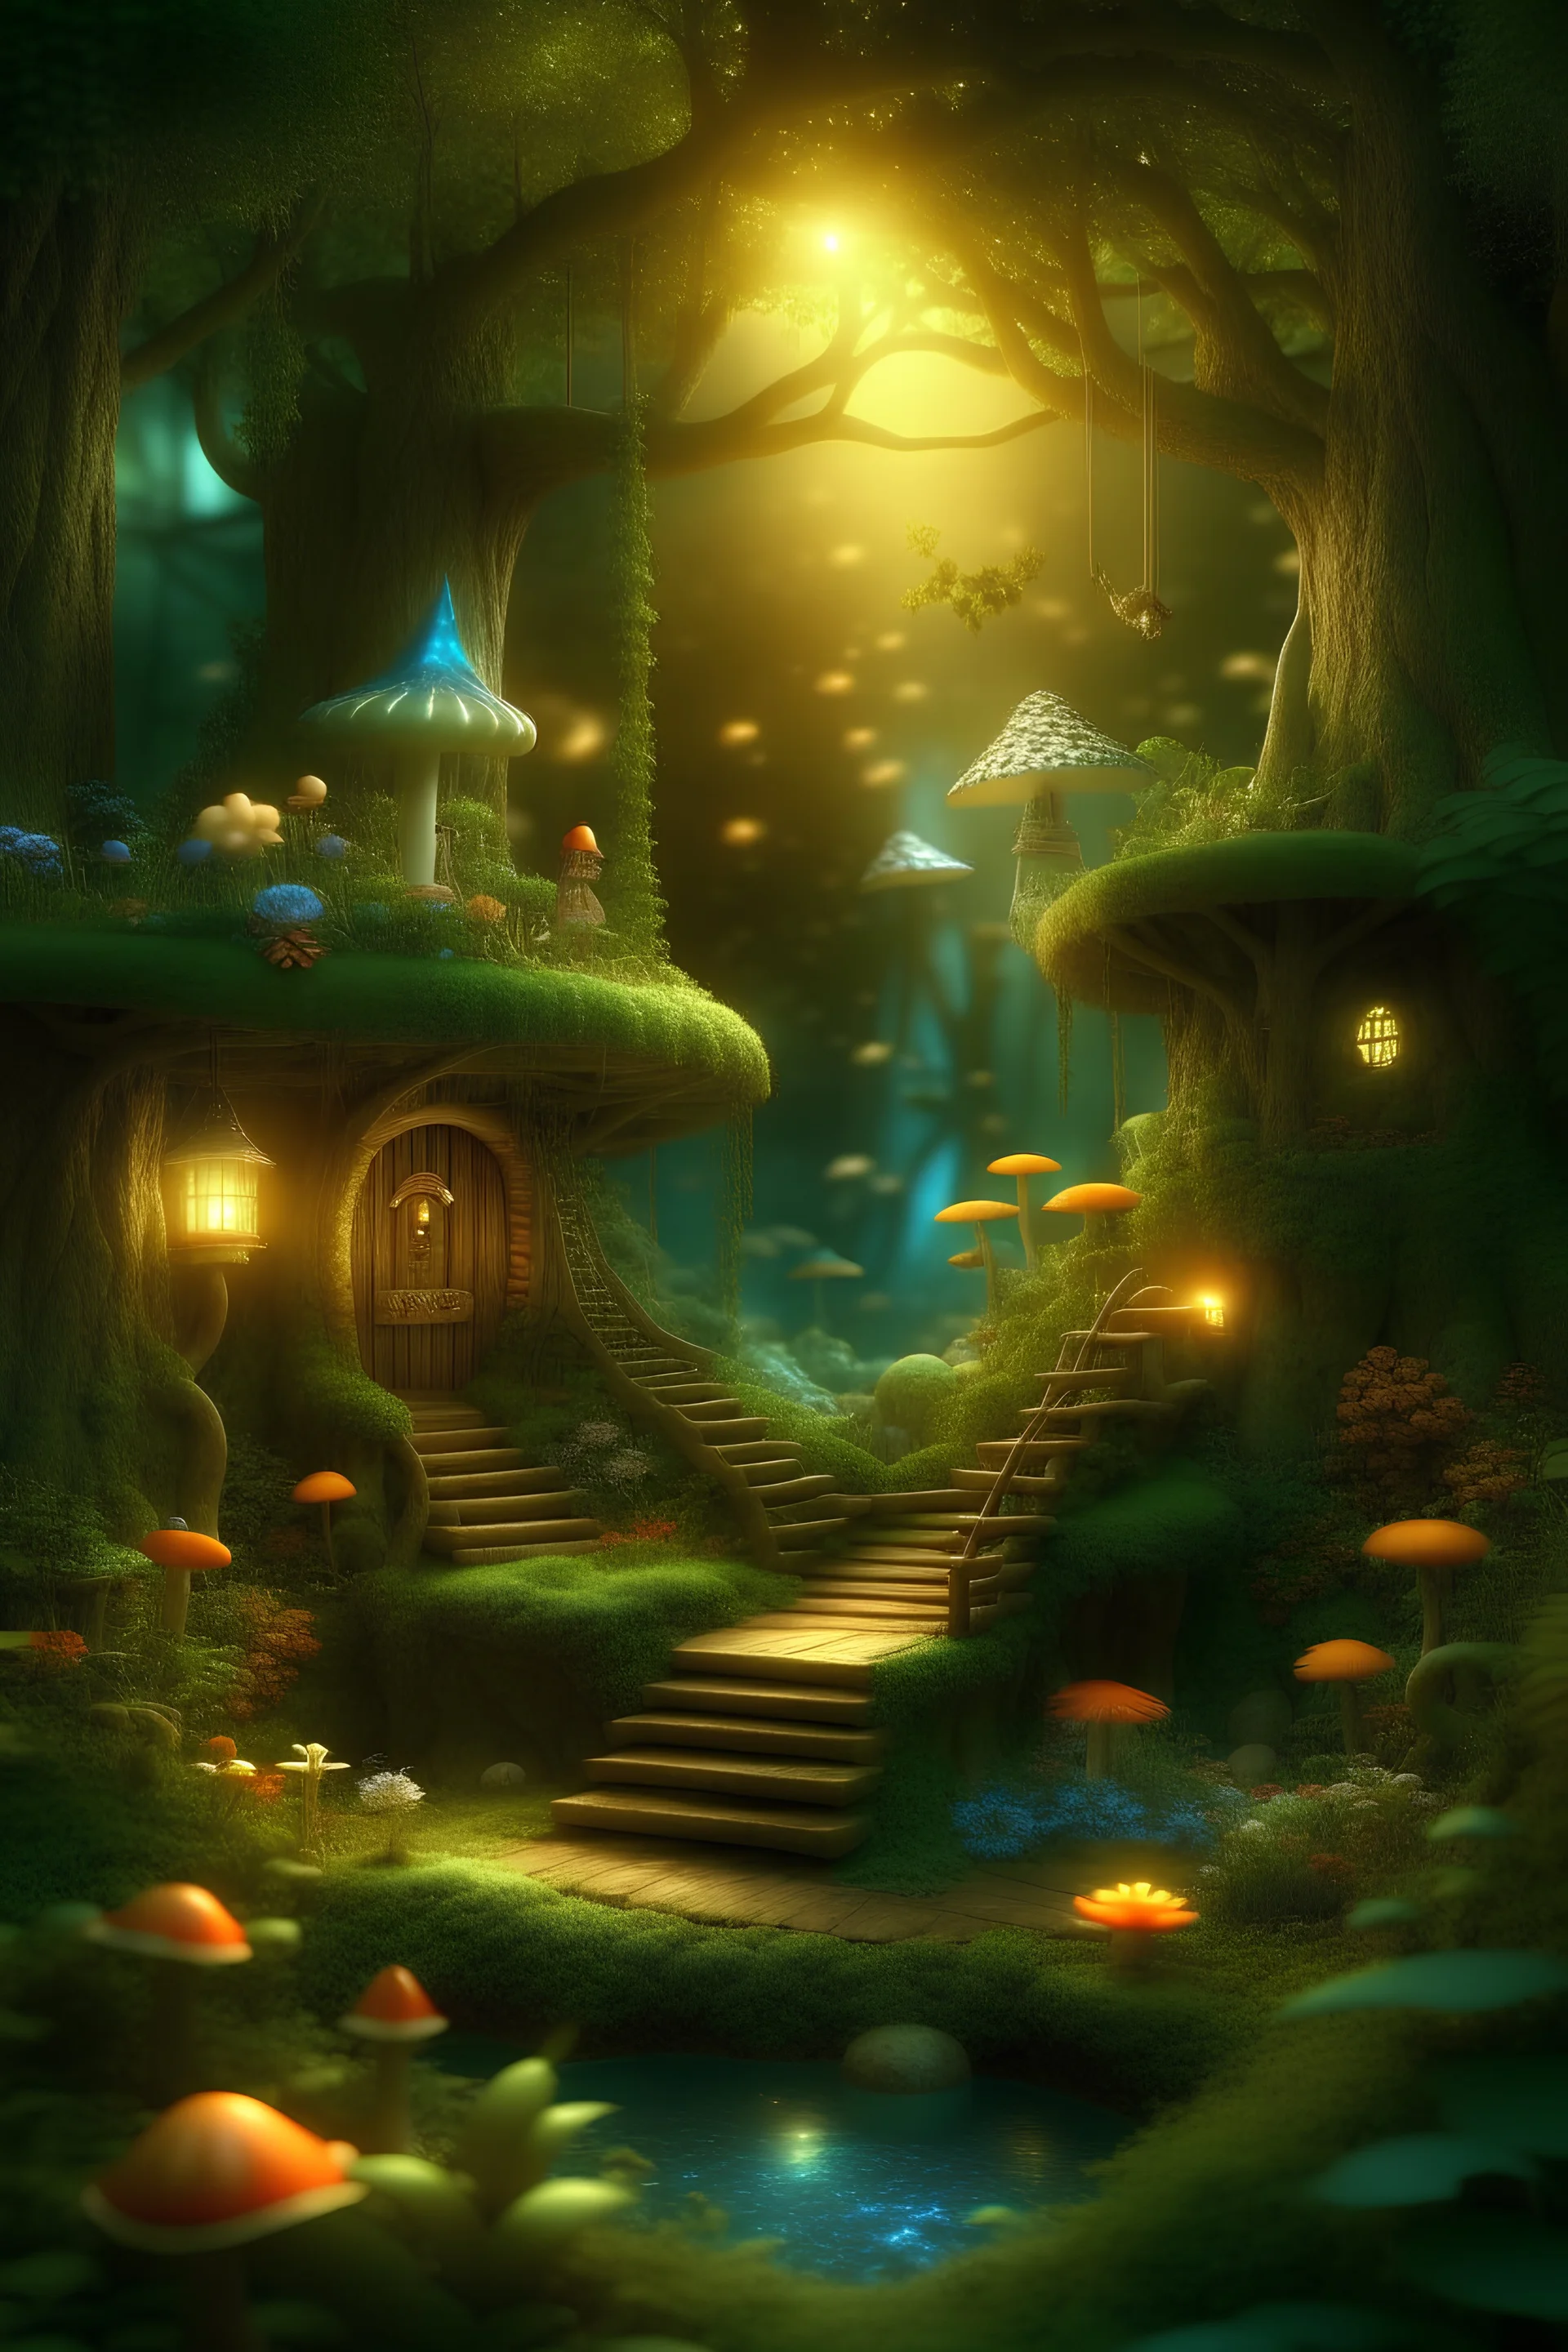 Enchanting forest with magical creatures, towering trees, and hidden pathways. Imagine a world where fairies, unicorns, and friendly woodland animals coexist.